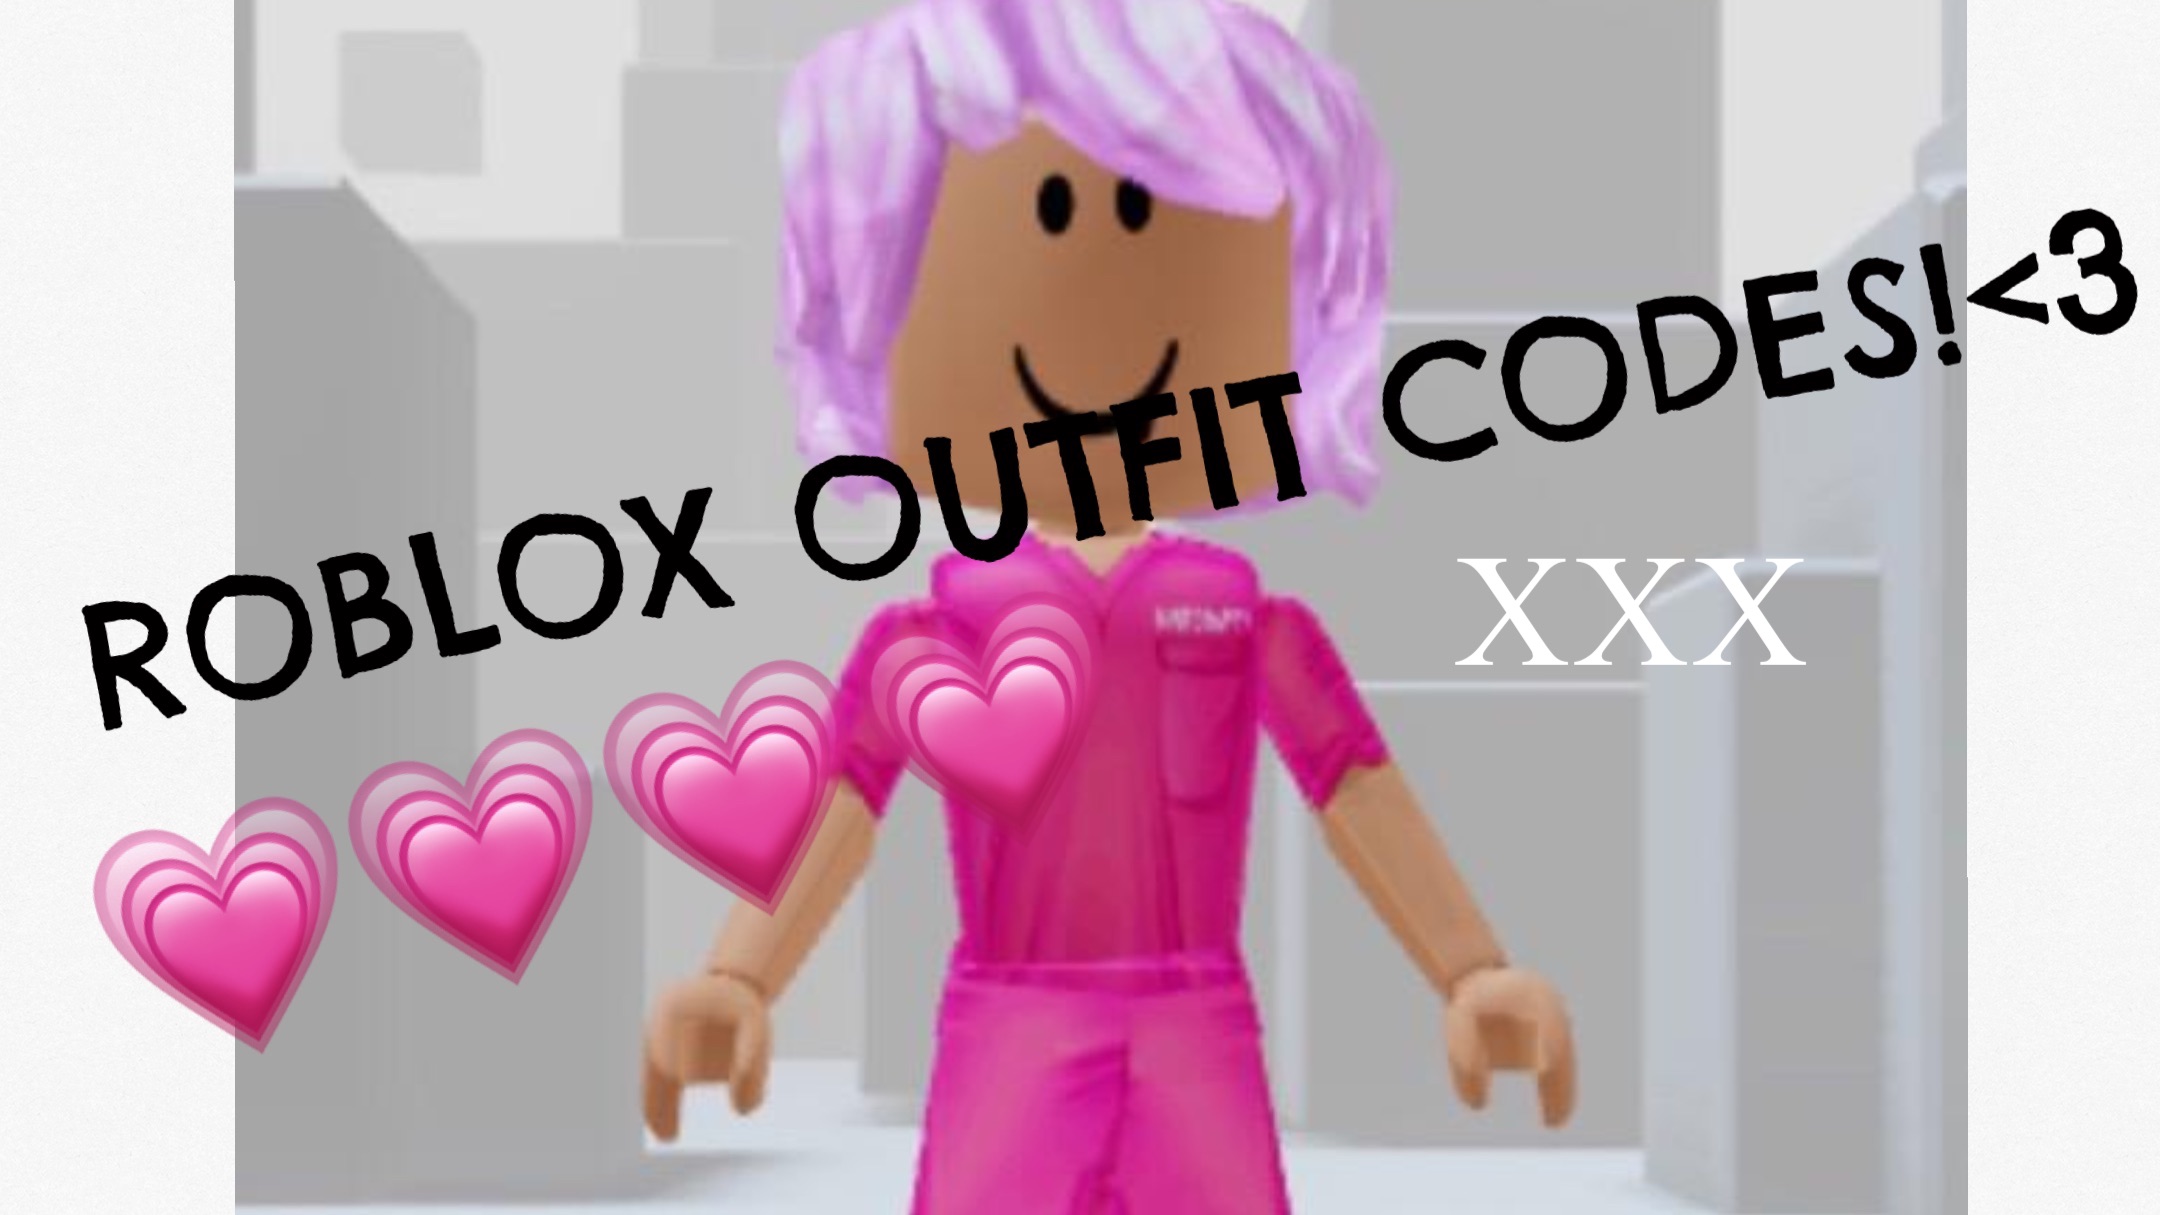 ROBLOX OUTFIT CODES X<33 - BiliBili